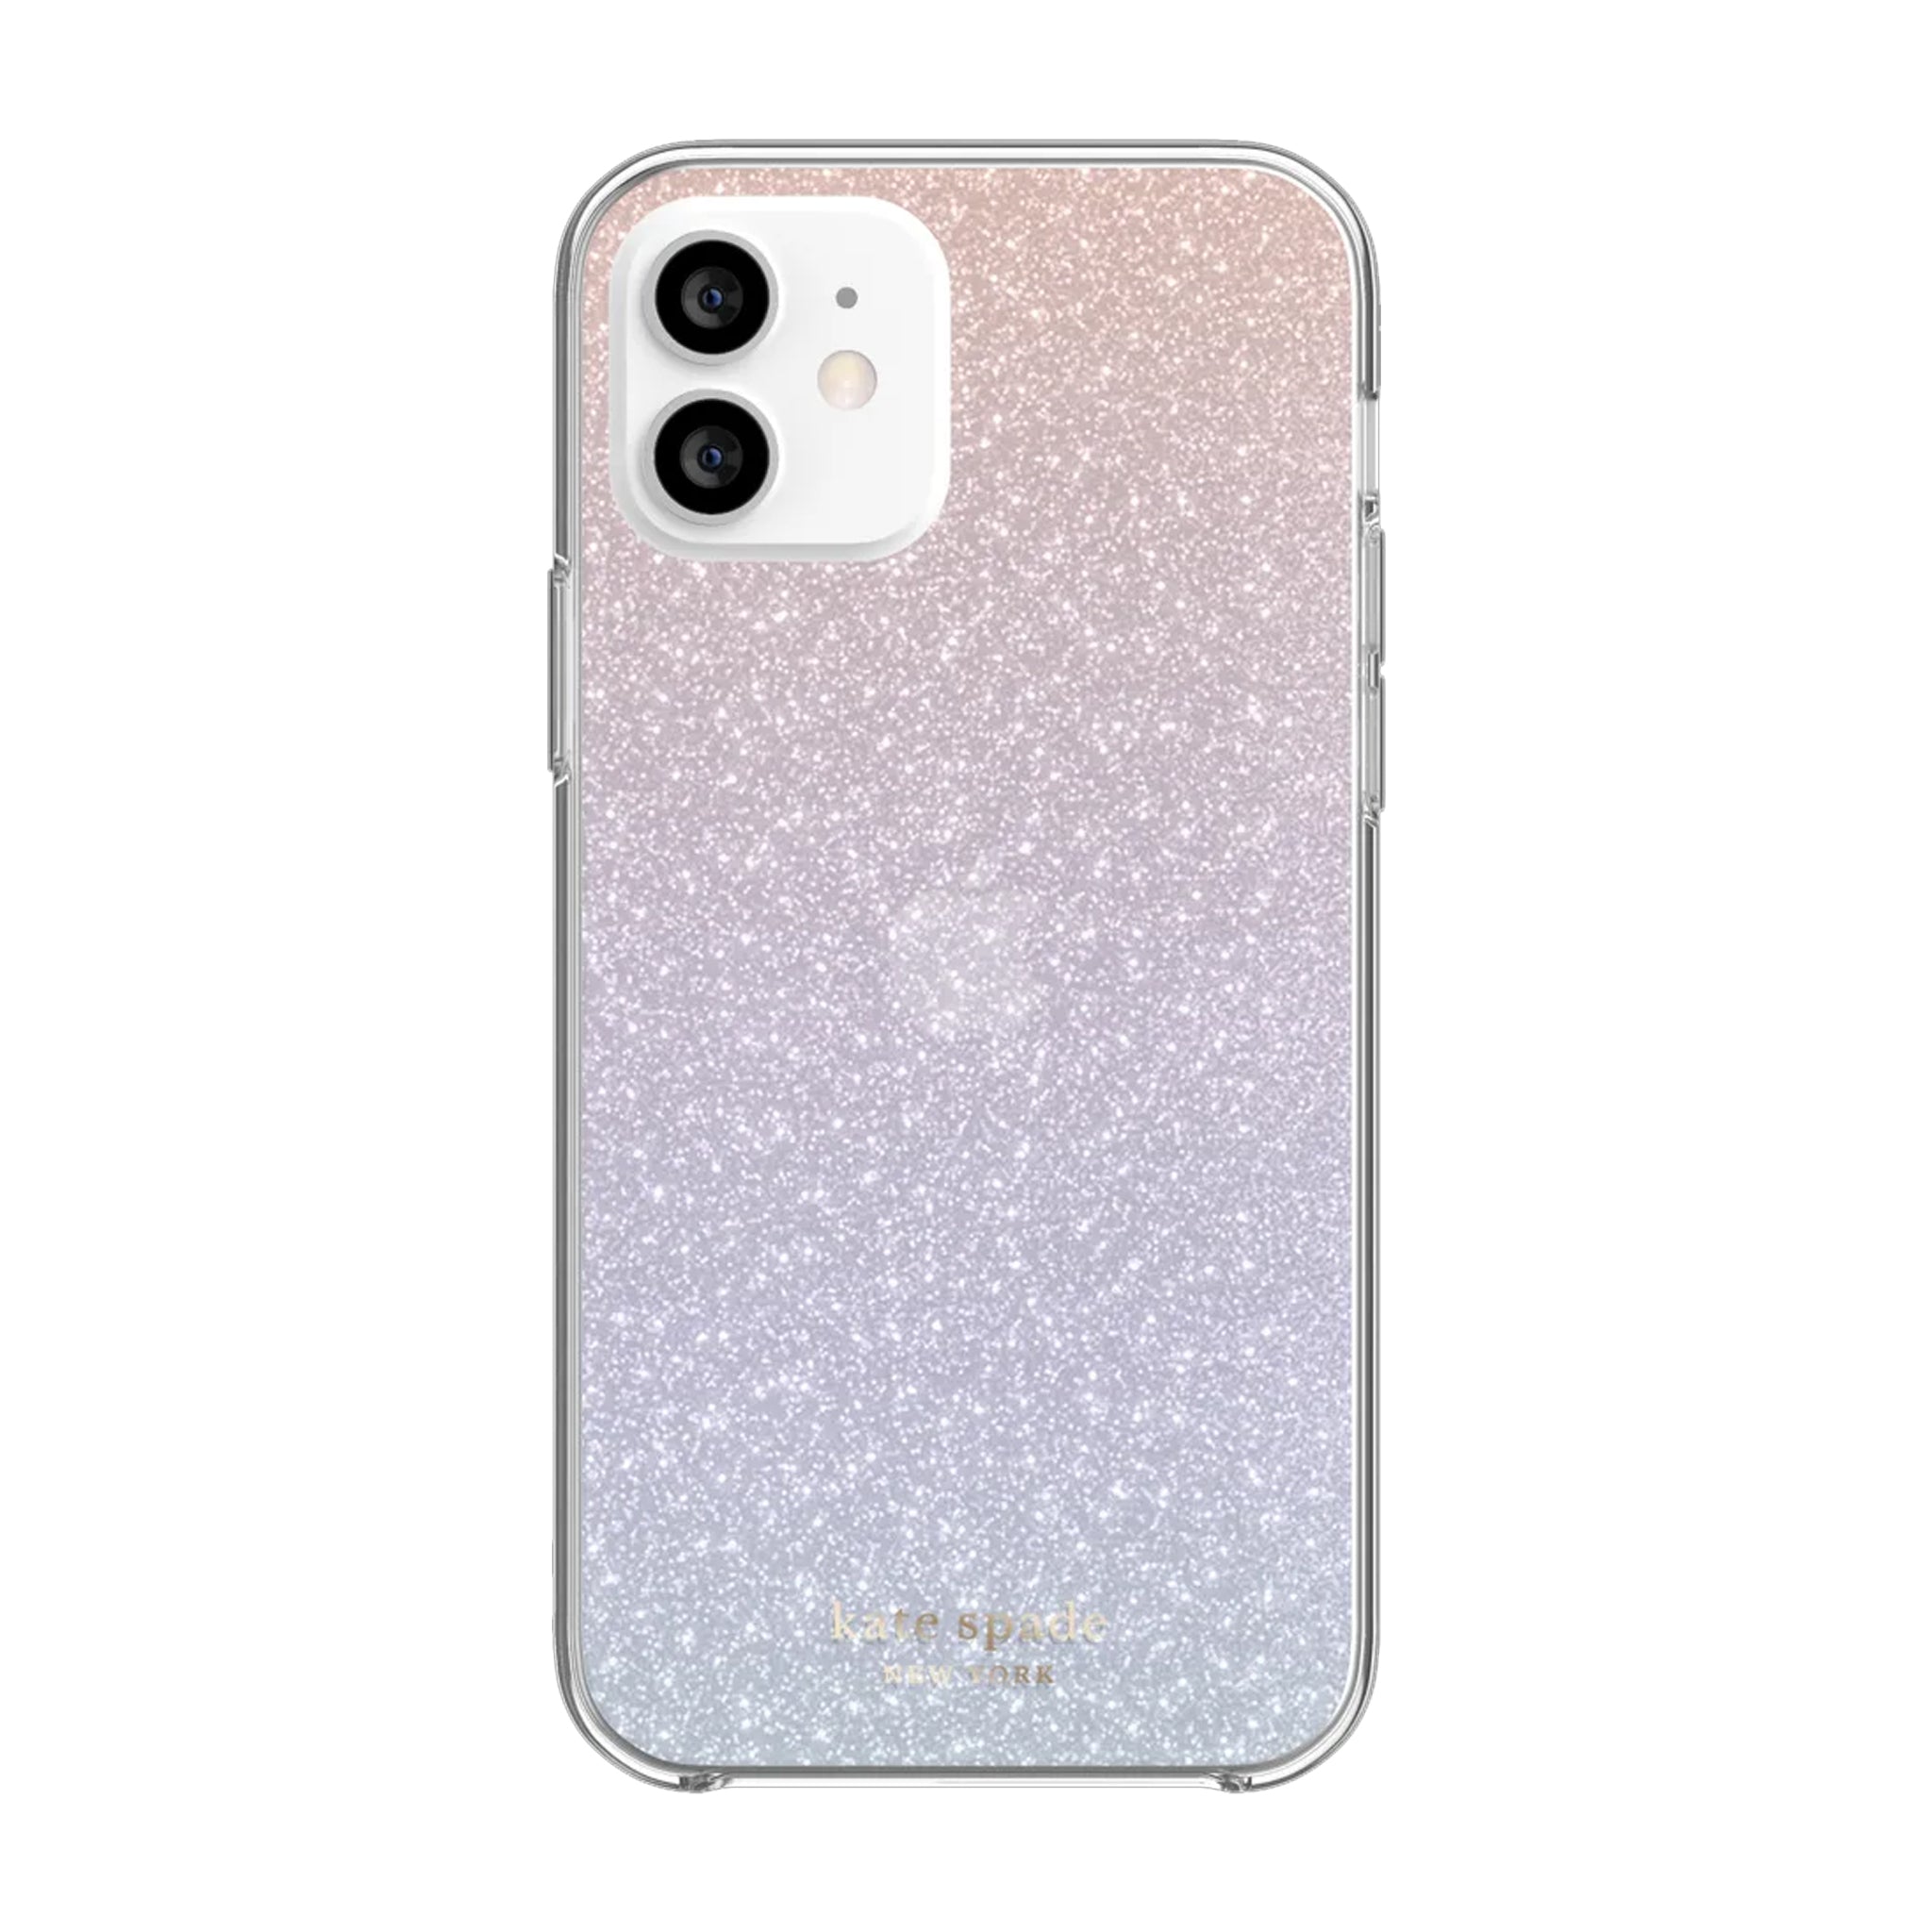 Kate Spade - New York Protective Hardshell Case For Apple Iphone 12 Pro / 12 - Ombre Glitter